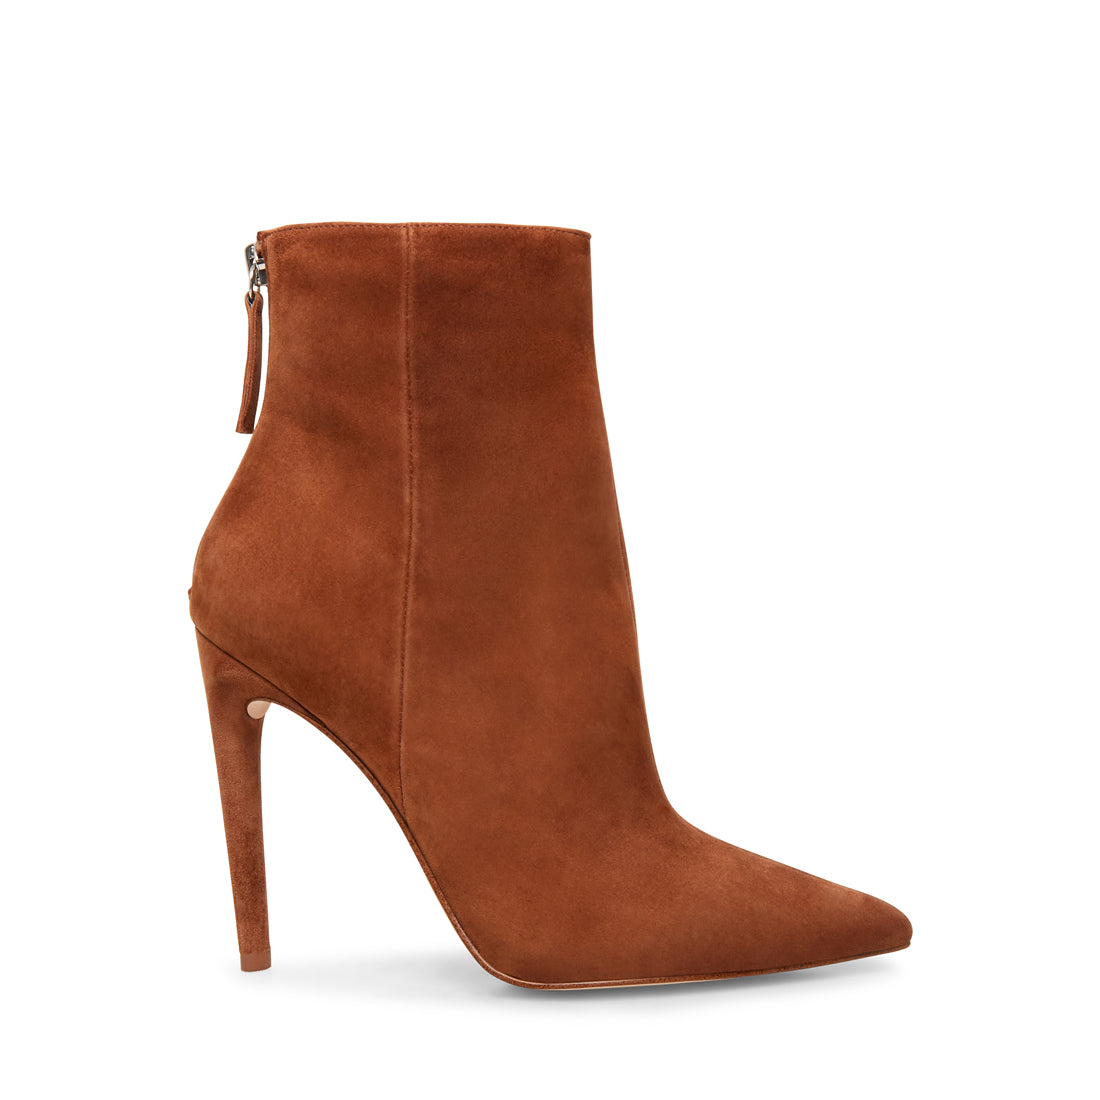 Booties, Ankle Boots \u0026 Ankle Booties 